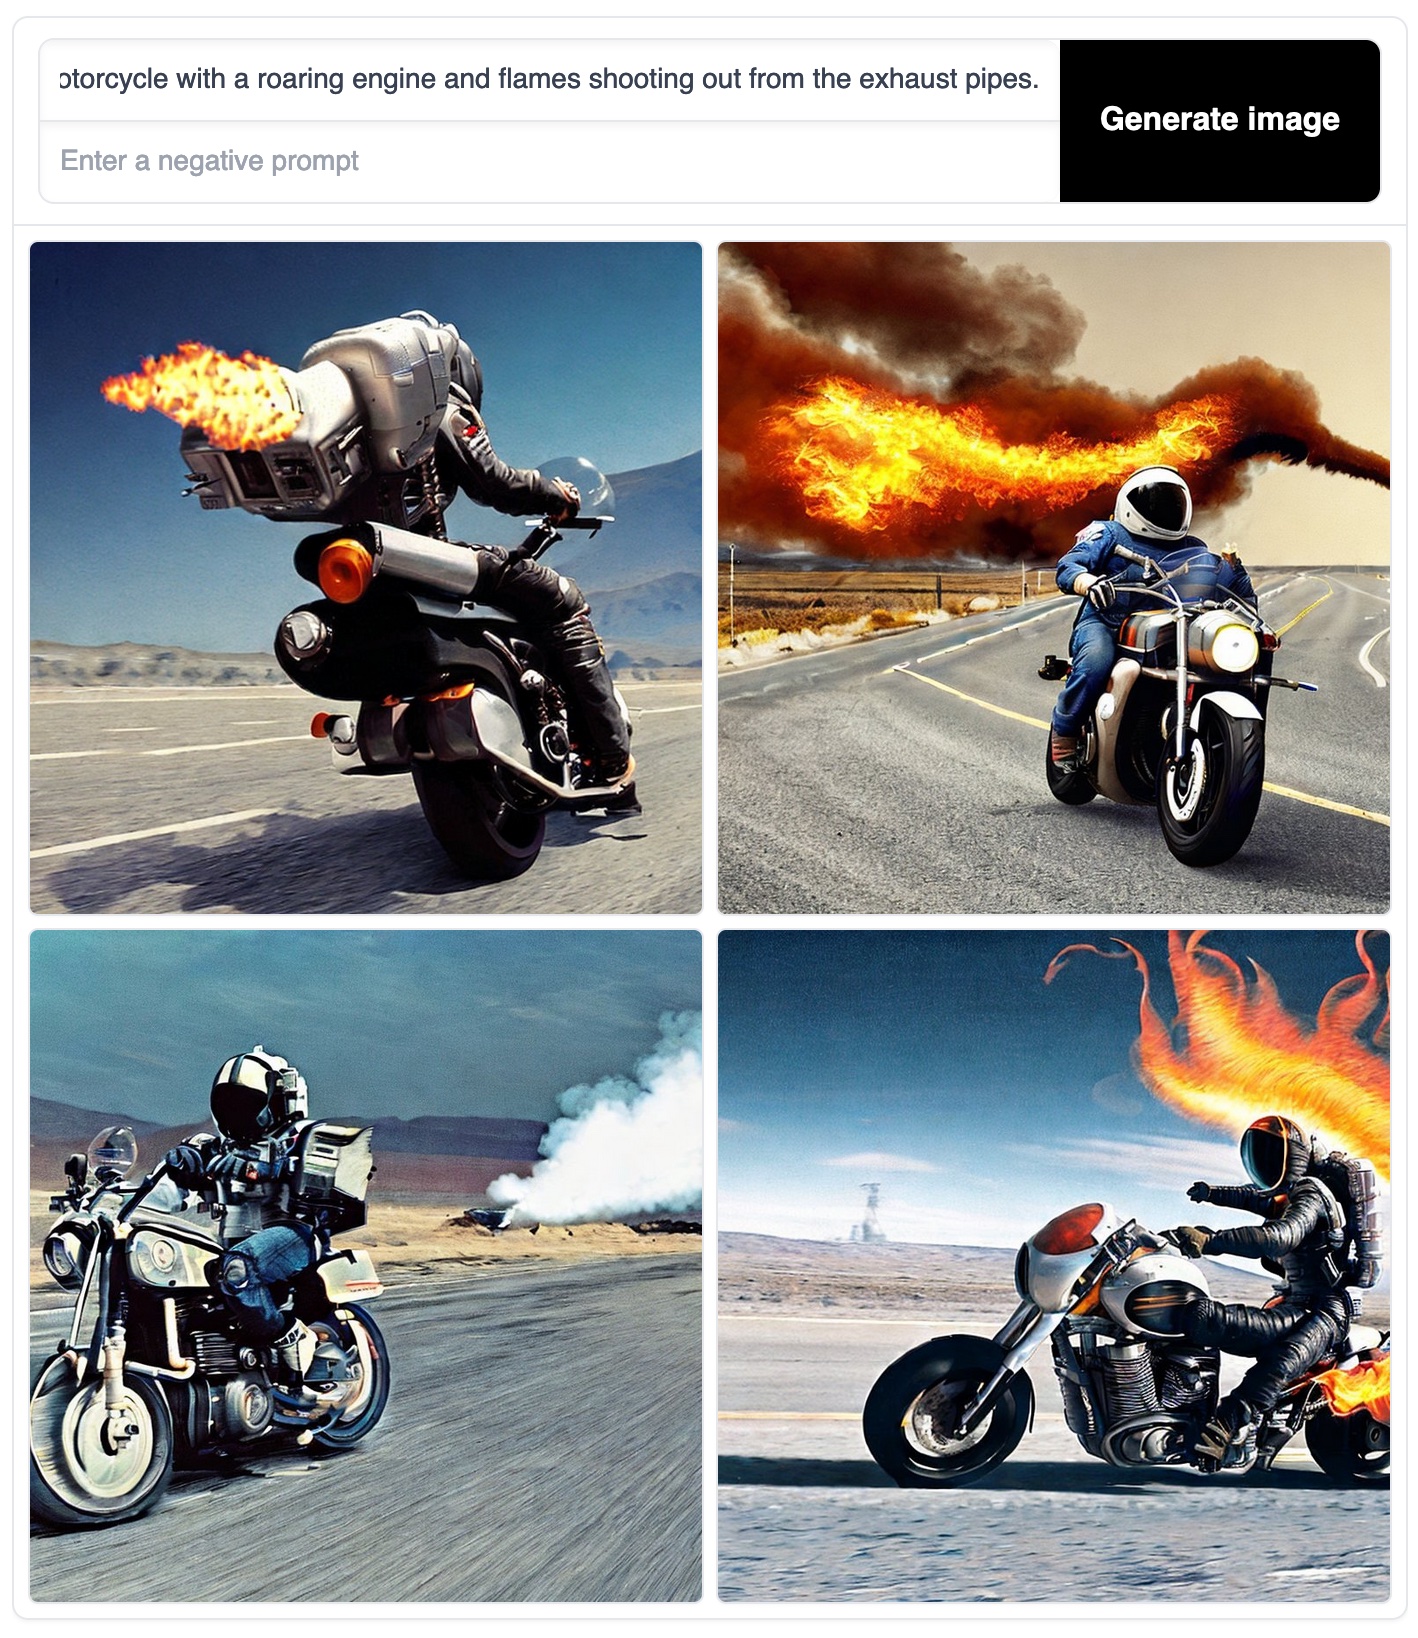 An astronaut with a jet pack strapped to their back, speeding down a deserted highway on a motorcycle with a roaring engine and flames shooting out from the exhaust pipes.